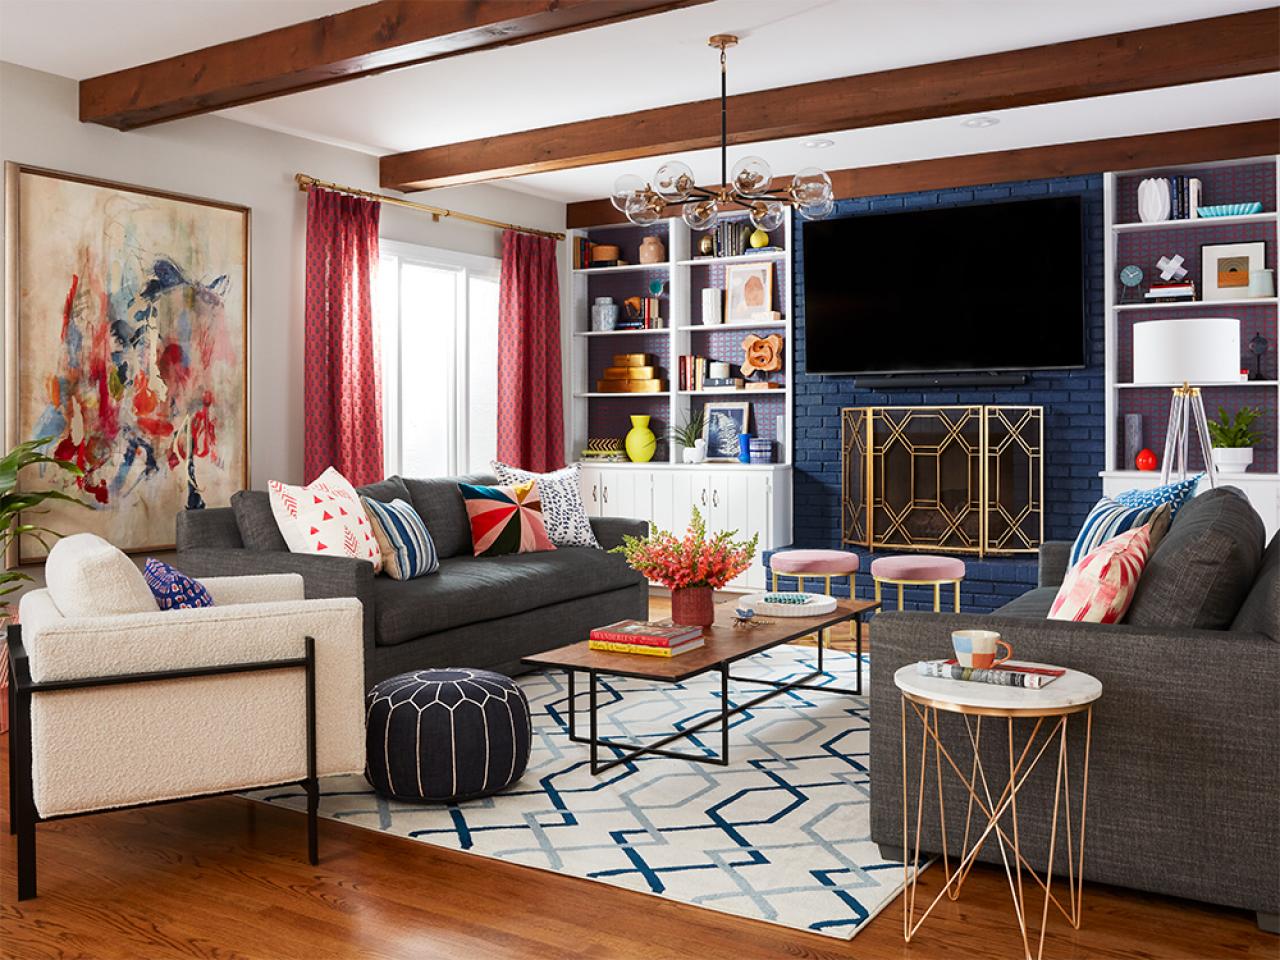 A Colorful Living Room Renovation With Ideas to Steal - HGTV.com | HGTV